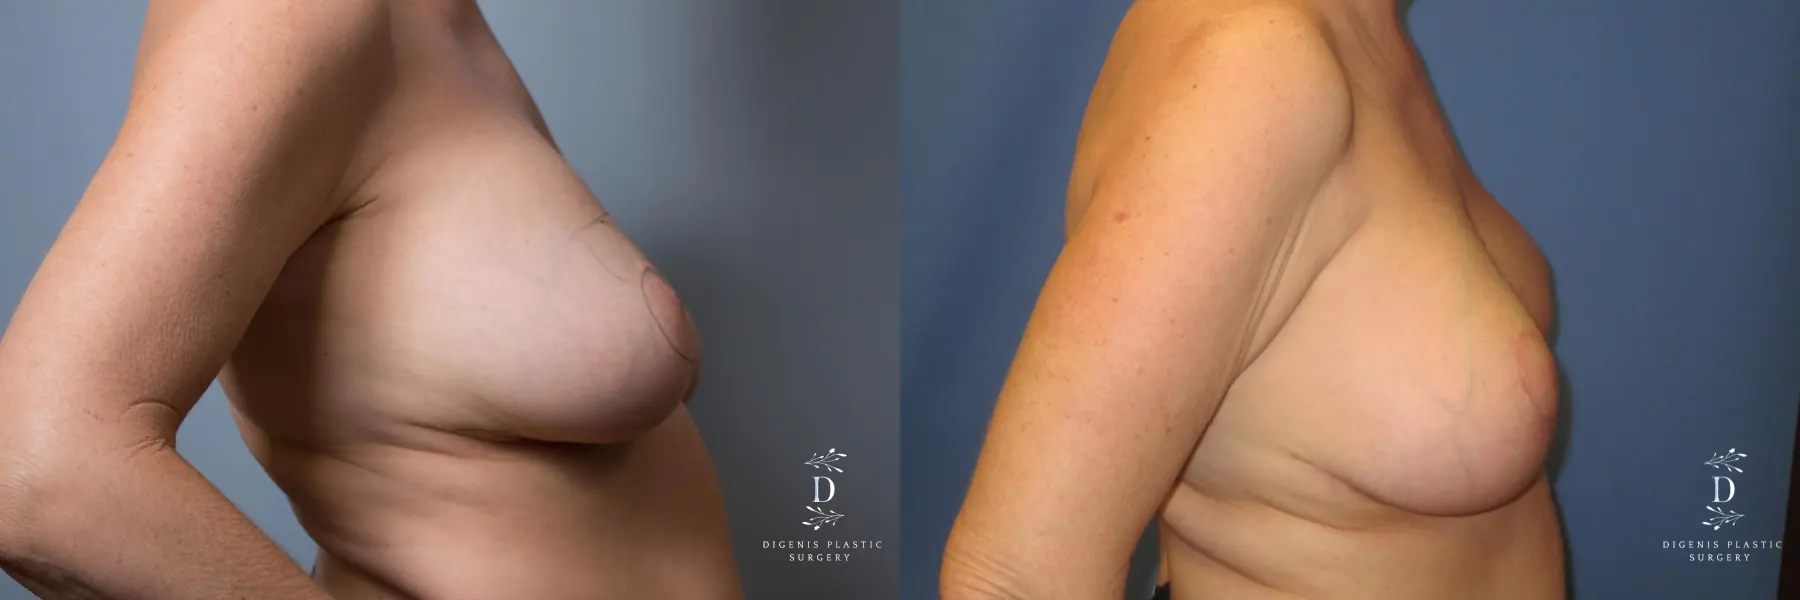 Breast Lift: Patient 6 - Before and After 3